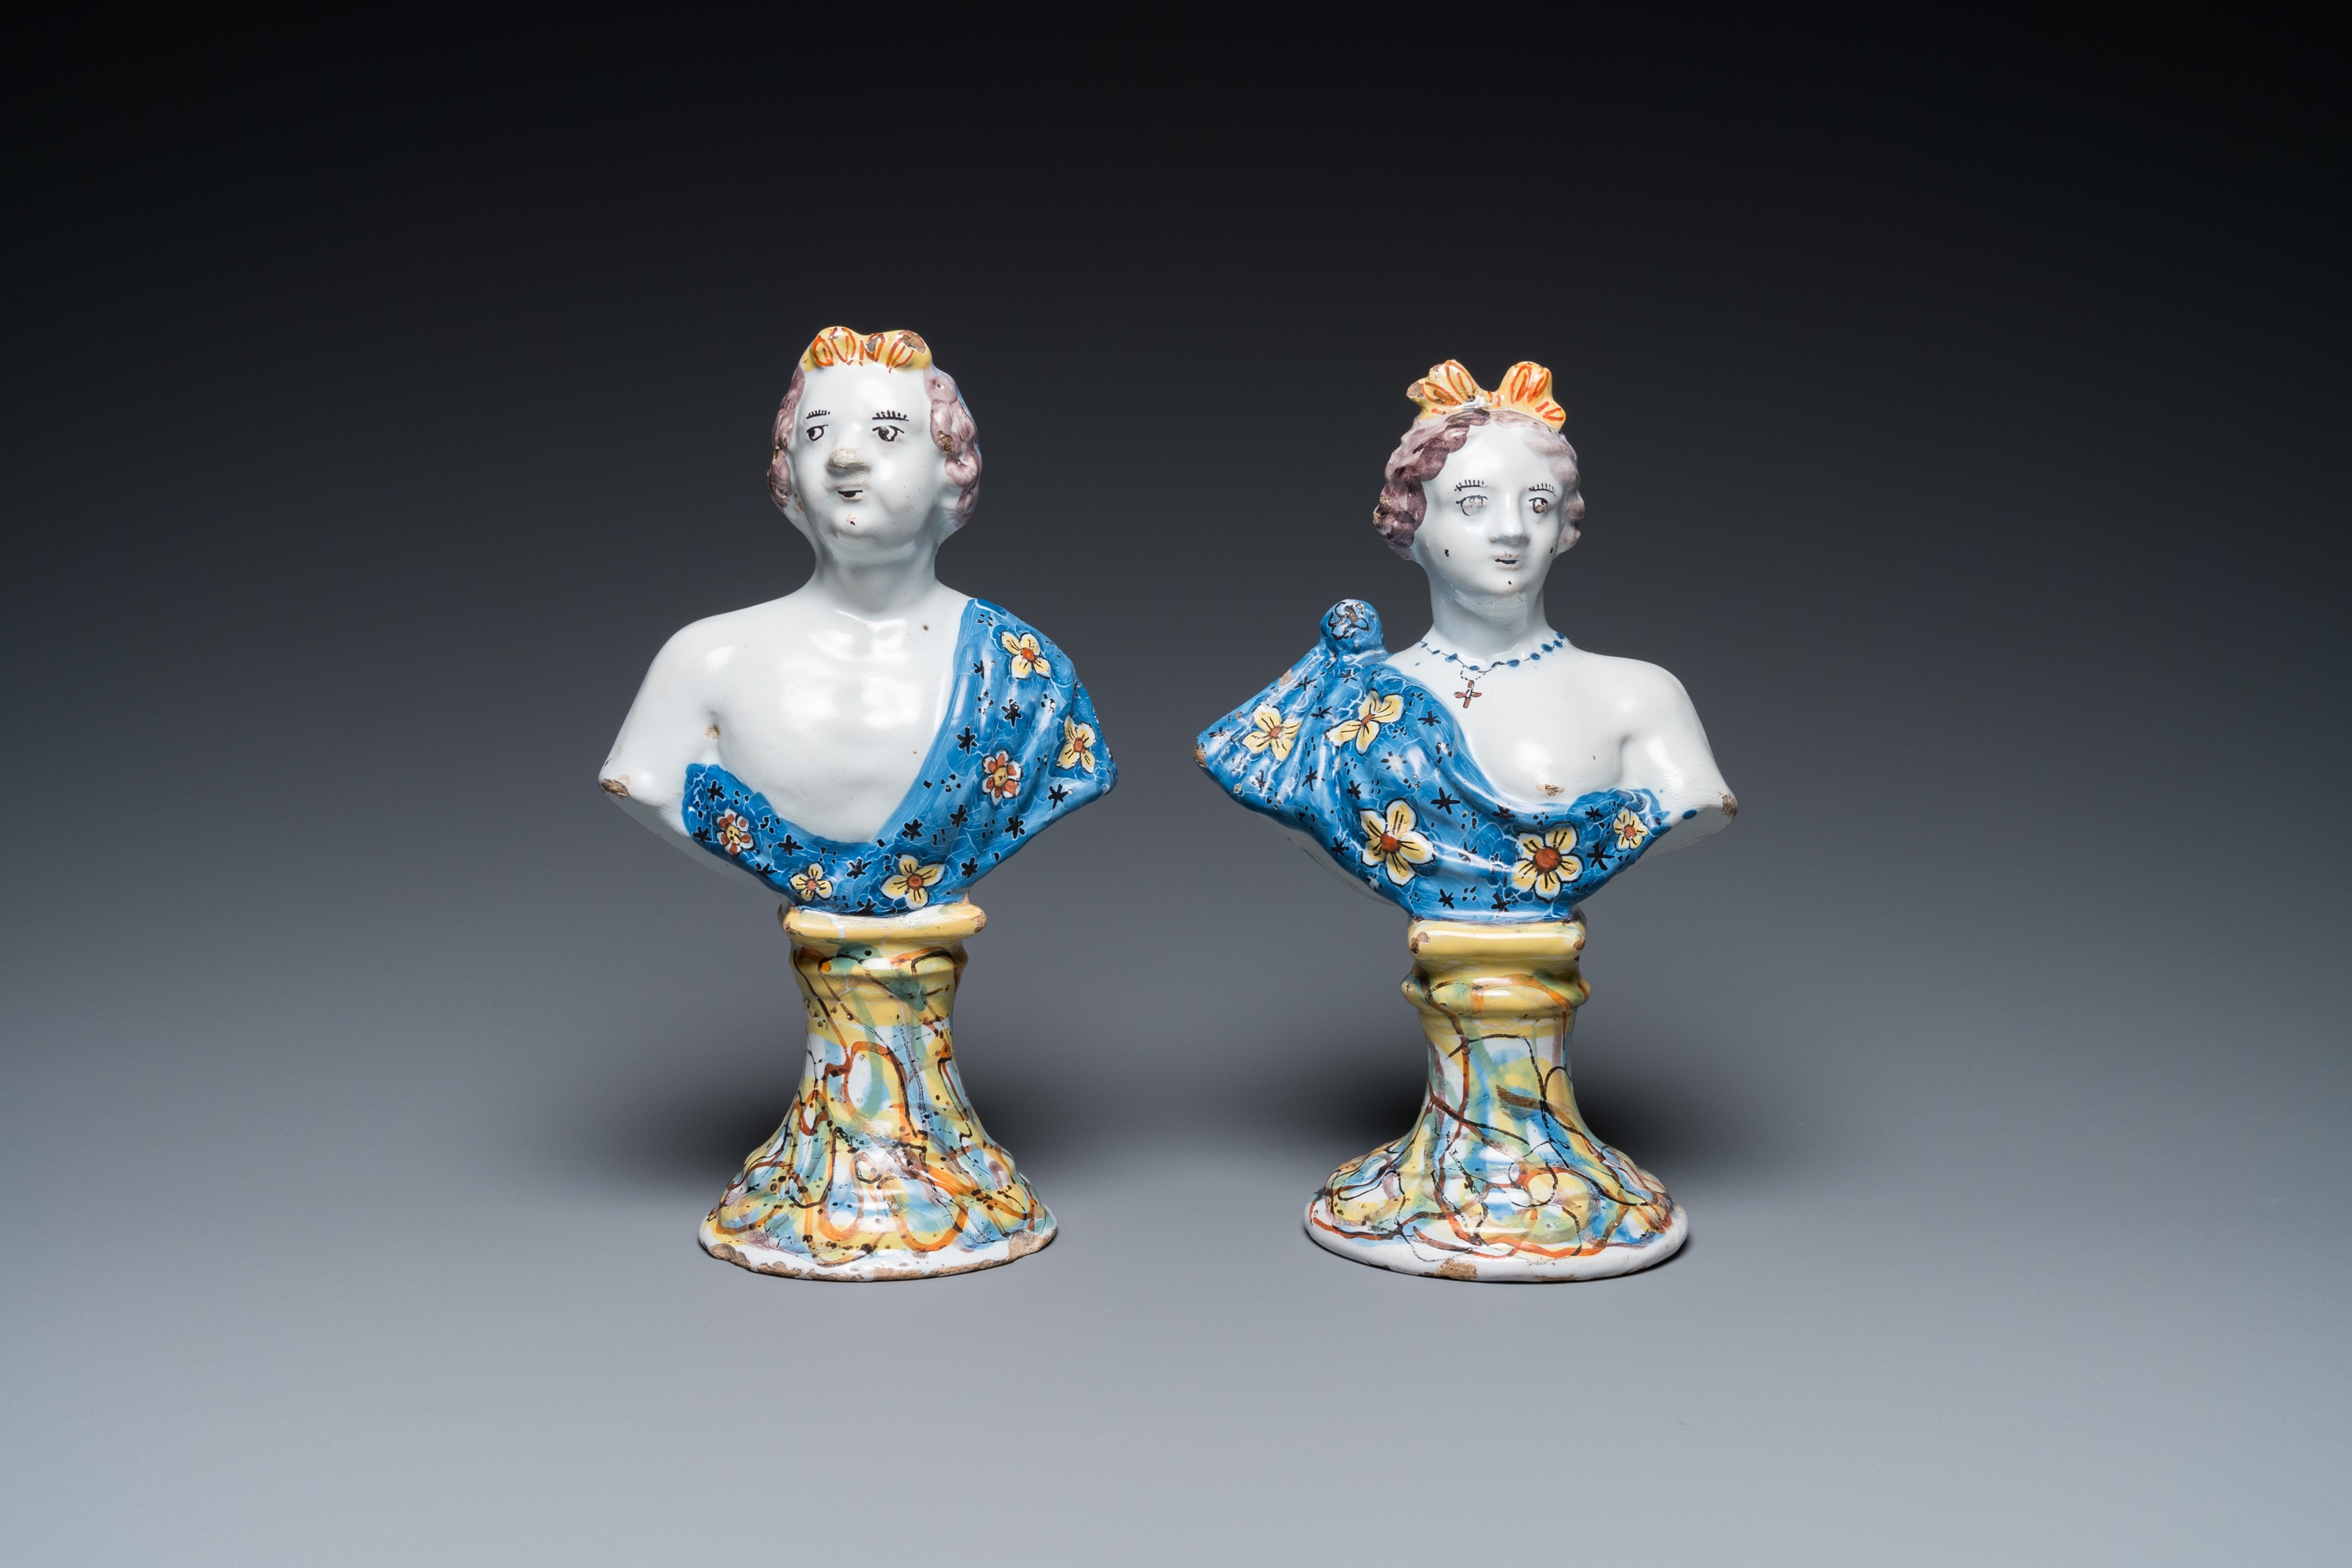 A pair of polychrome Dutch Delft busts on bases imitating marble, 18th C. - Image 2 of 7